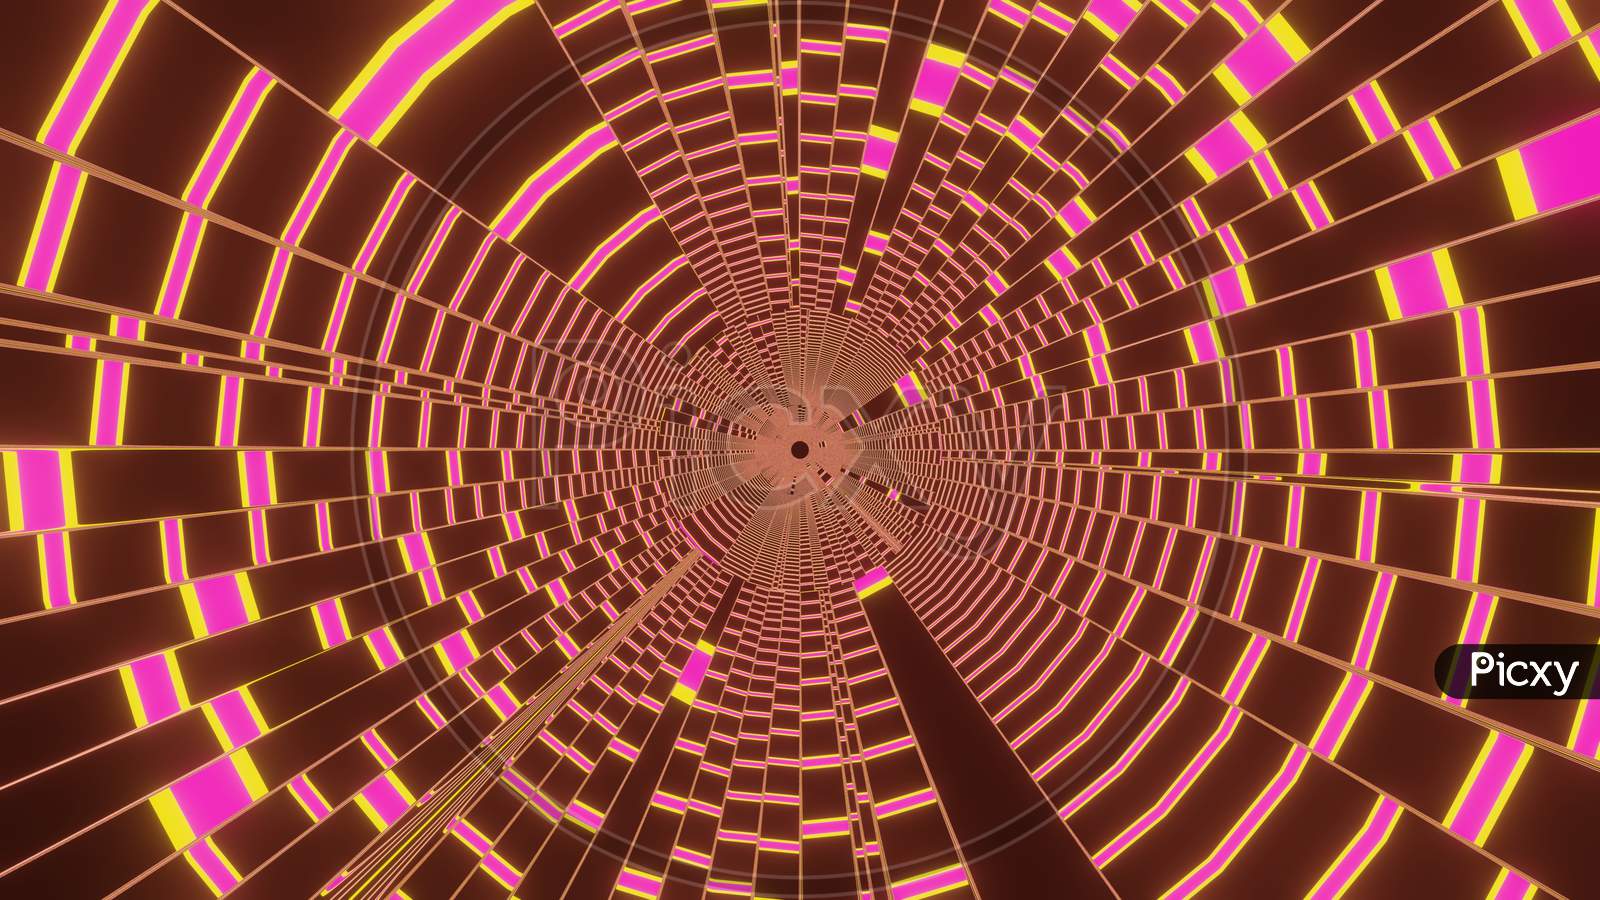 3D Illustration Graphic Of The Inside Tunnel Having Beautiful Pink And Yellow Color Texture And Pattern Seamless Loop Motion Graphics.